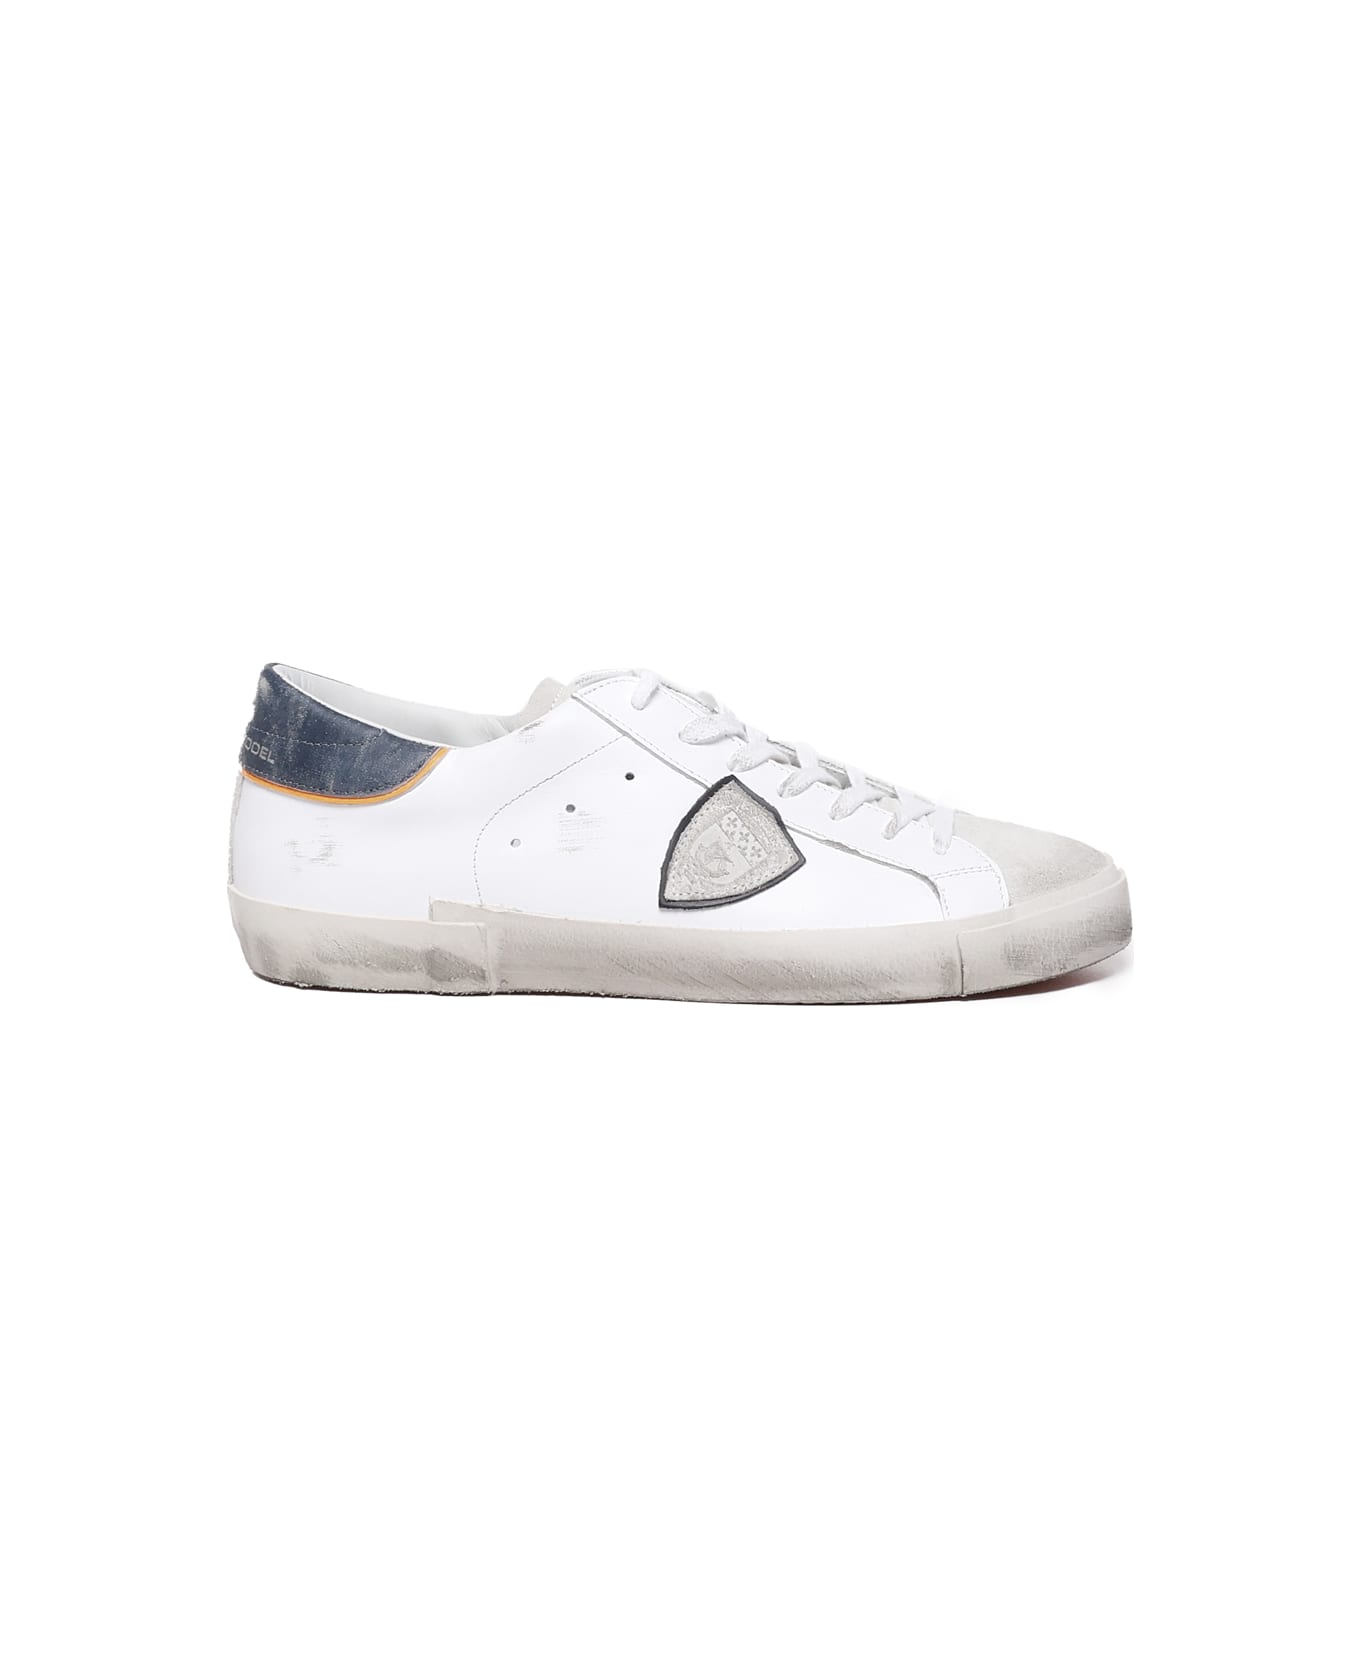 Philippe Model Prsx Low Sneakers - White, blue